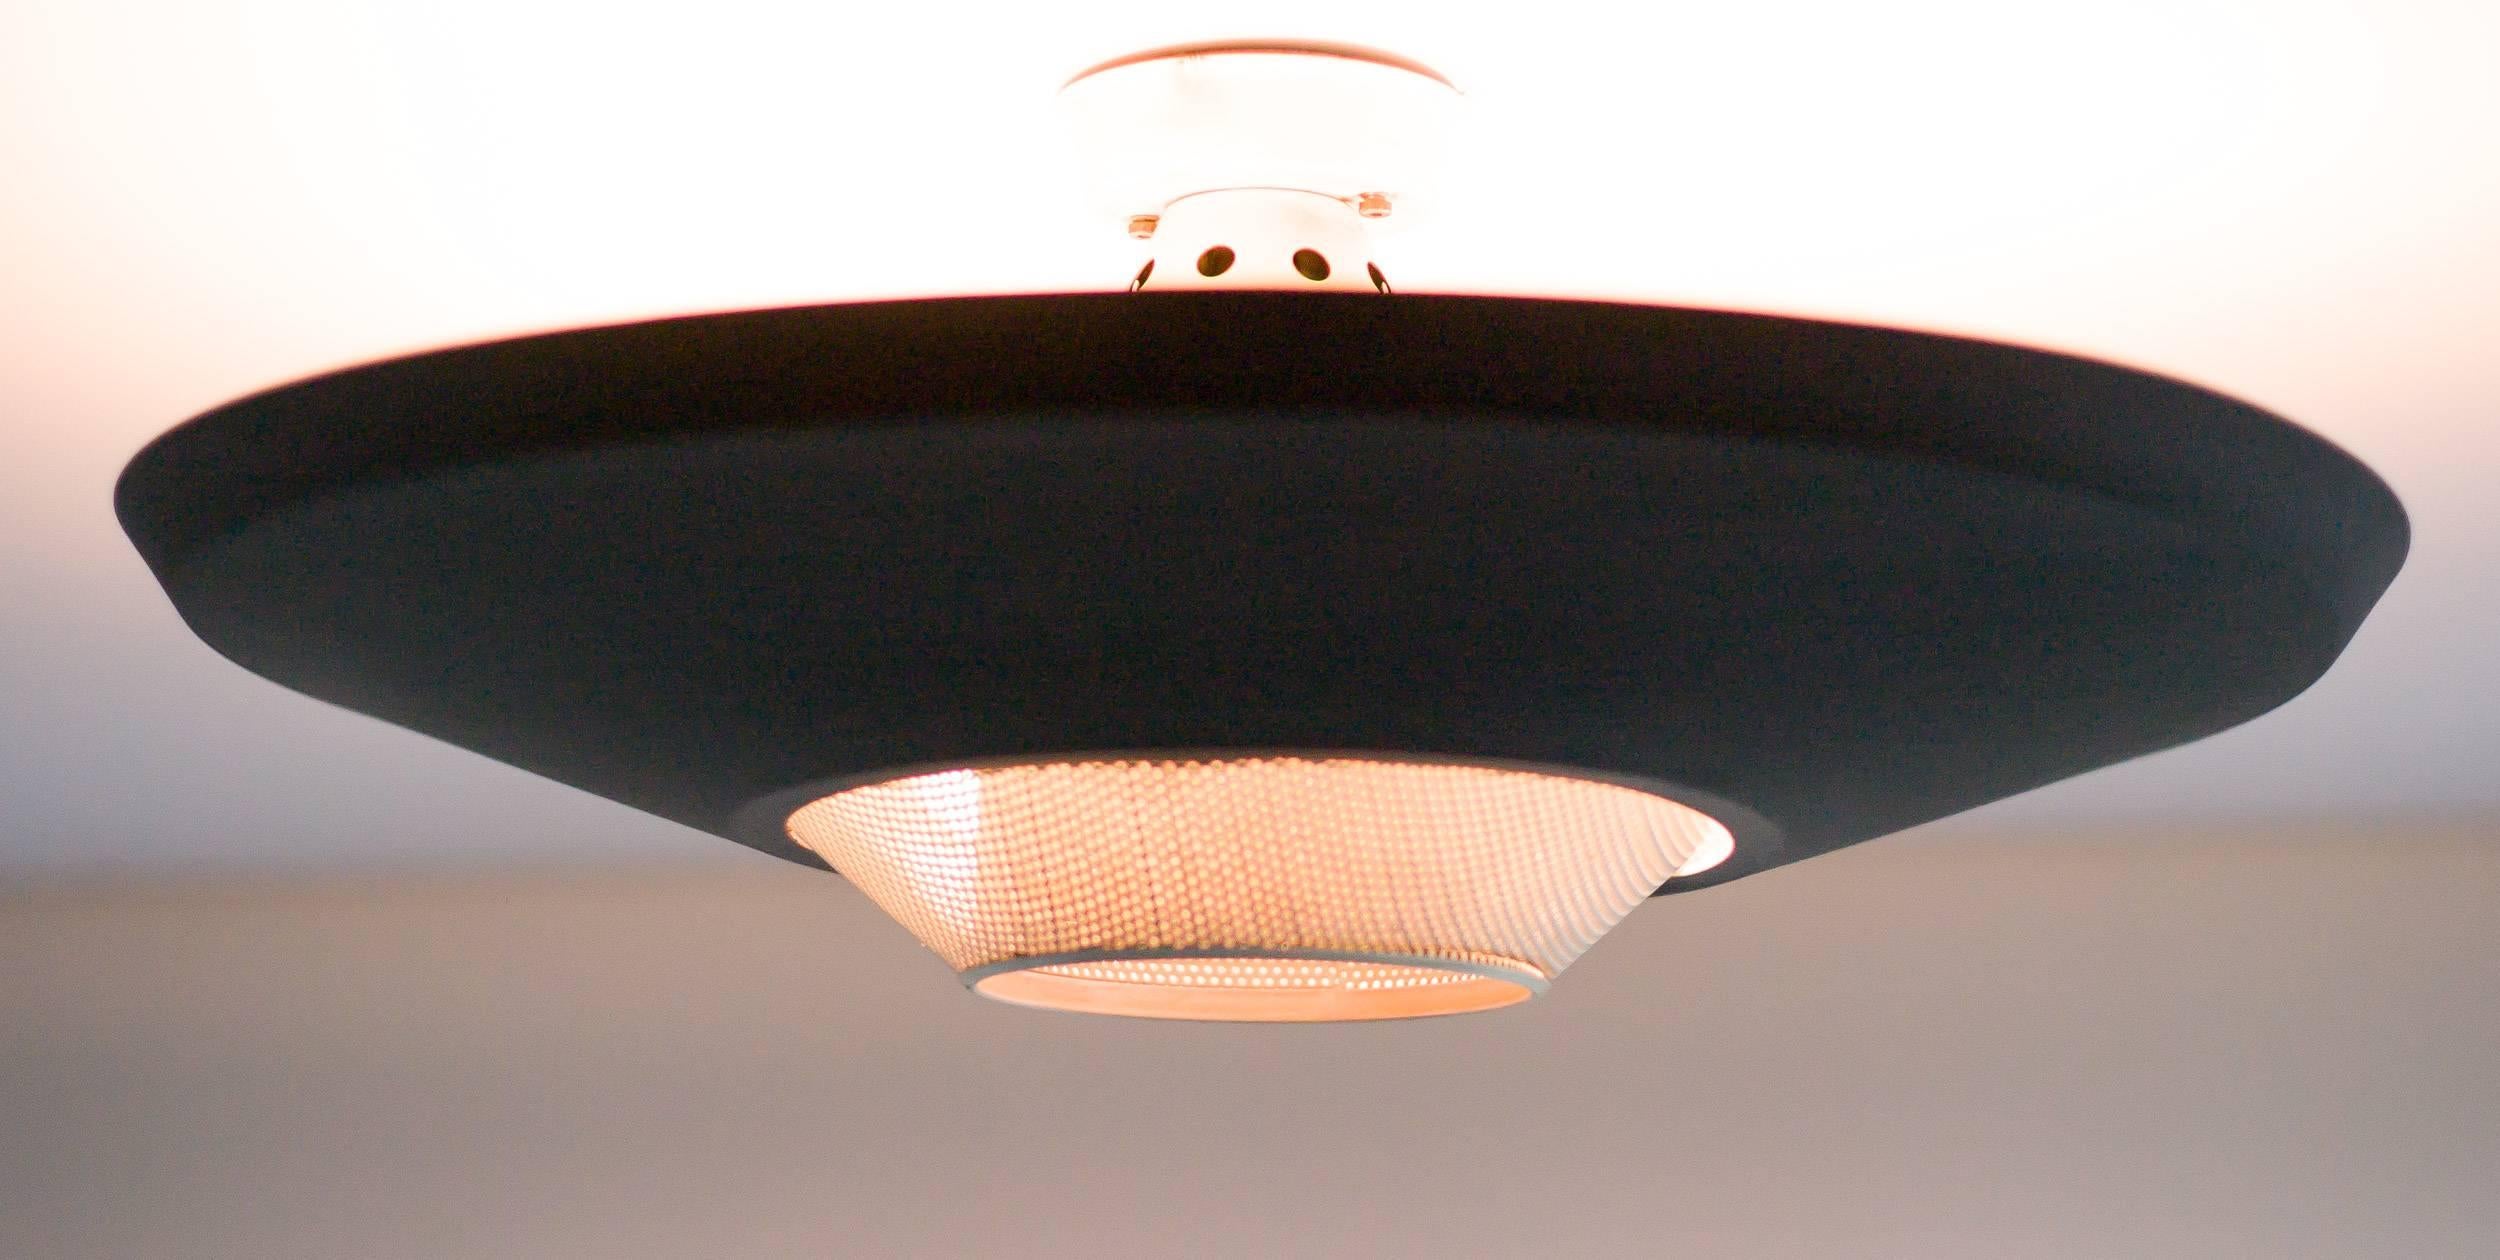 Industrial flush mount ceiling lamp designed by Louis Kalff for Philips. Matte black enameled shade with white enameled perforated centre shade to house a downward spot light, with three light bulbs above the black shade. 

Excellent fast and